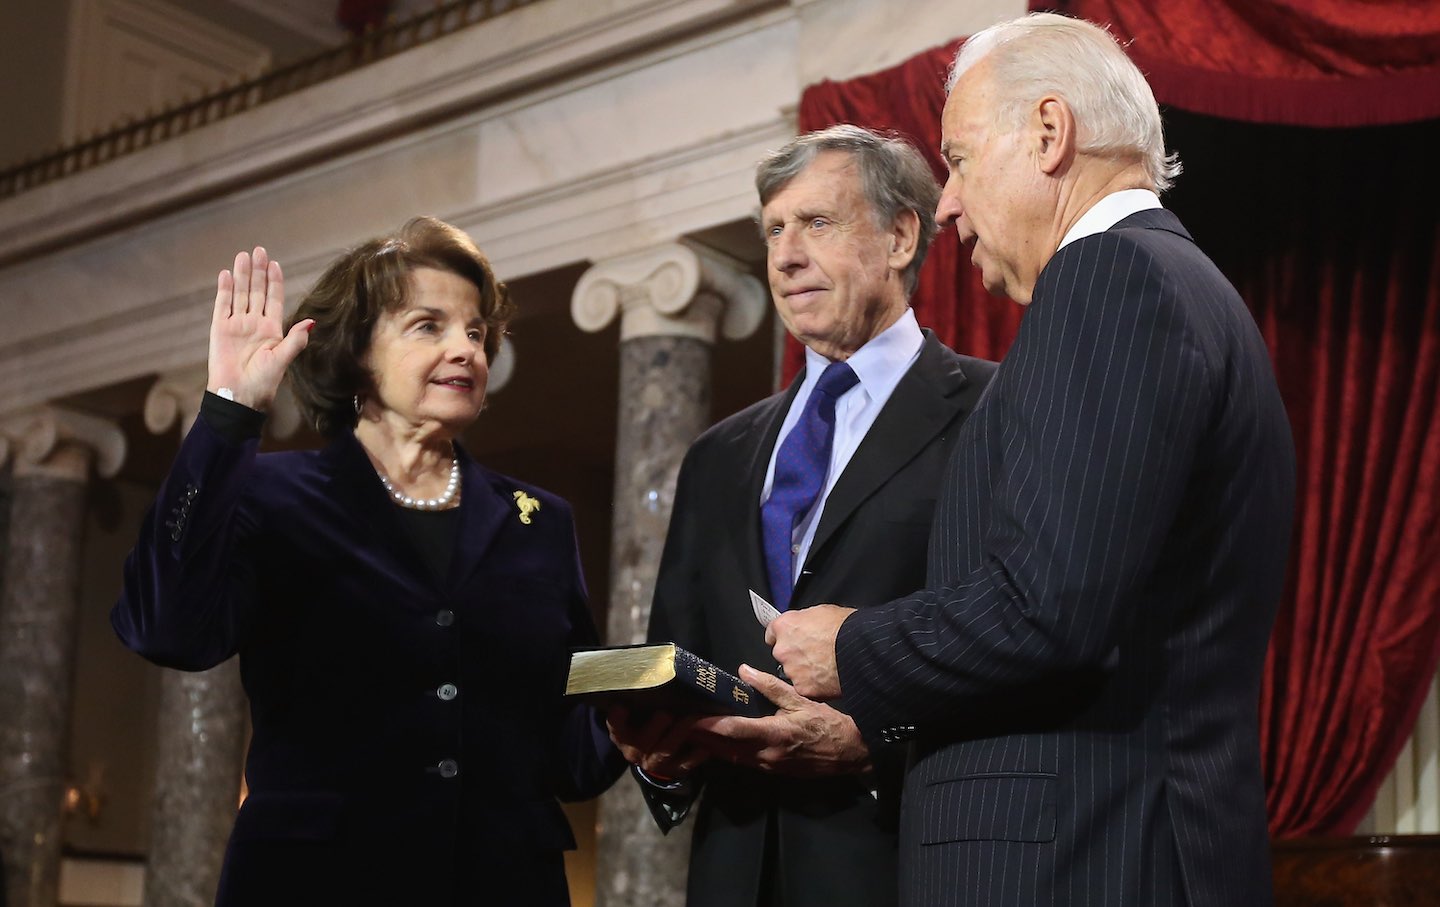 Senator Dianne Feinstein participates in a reenacted swearing-in with her husband Richard C. Blum and then–Vice President Joe Biden in the Old Senate Chamber at the US Capitol January 3, 2013, in Washington, D.C.